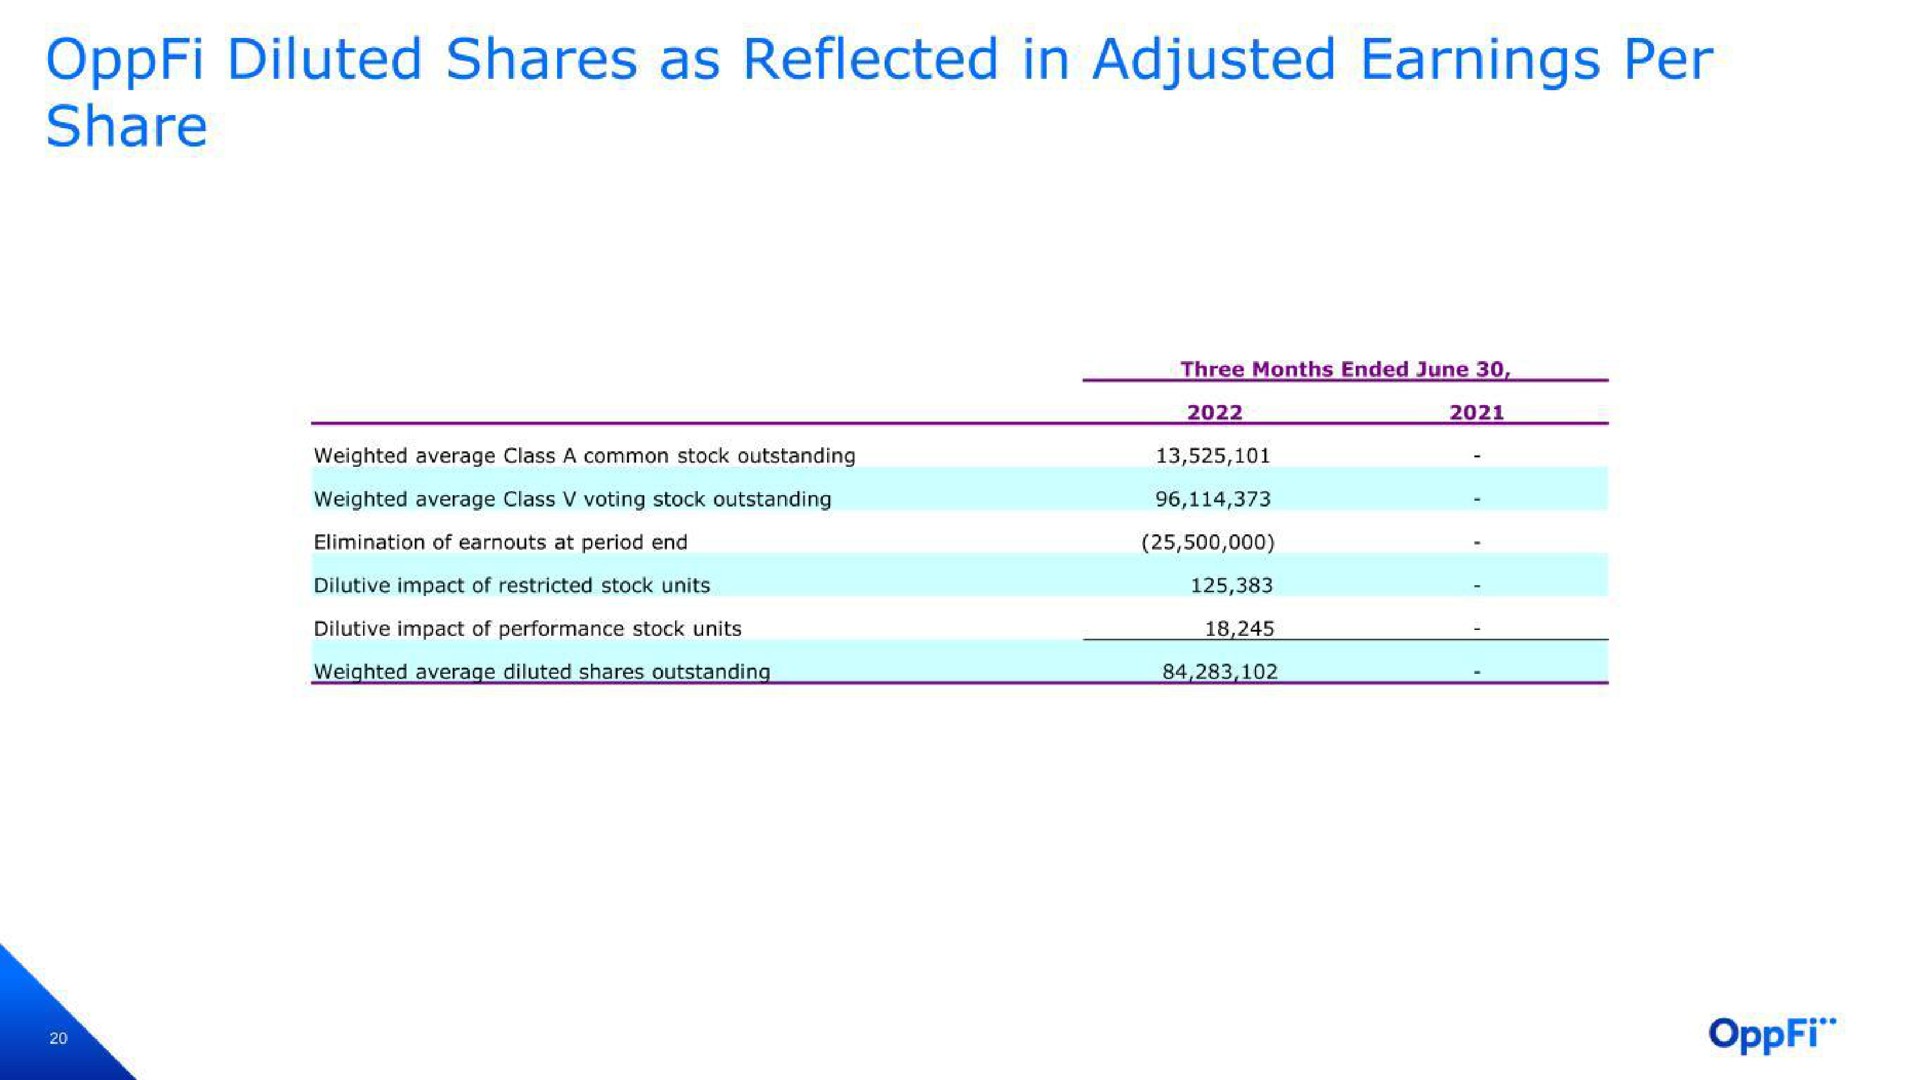 diluted shares as reflected in adjusted earnings per share | OppFi